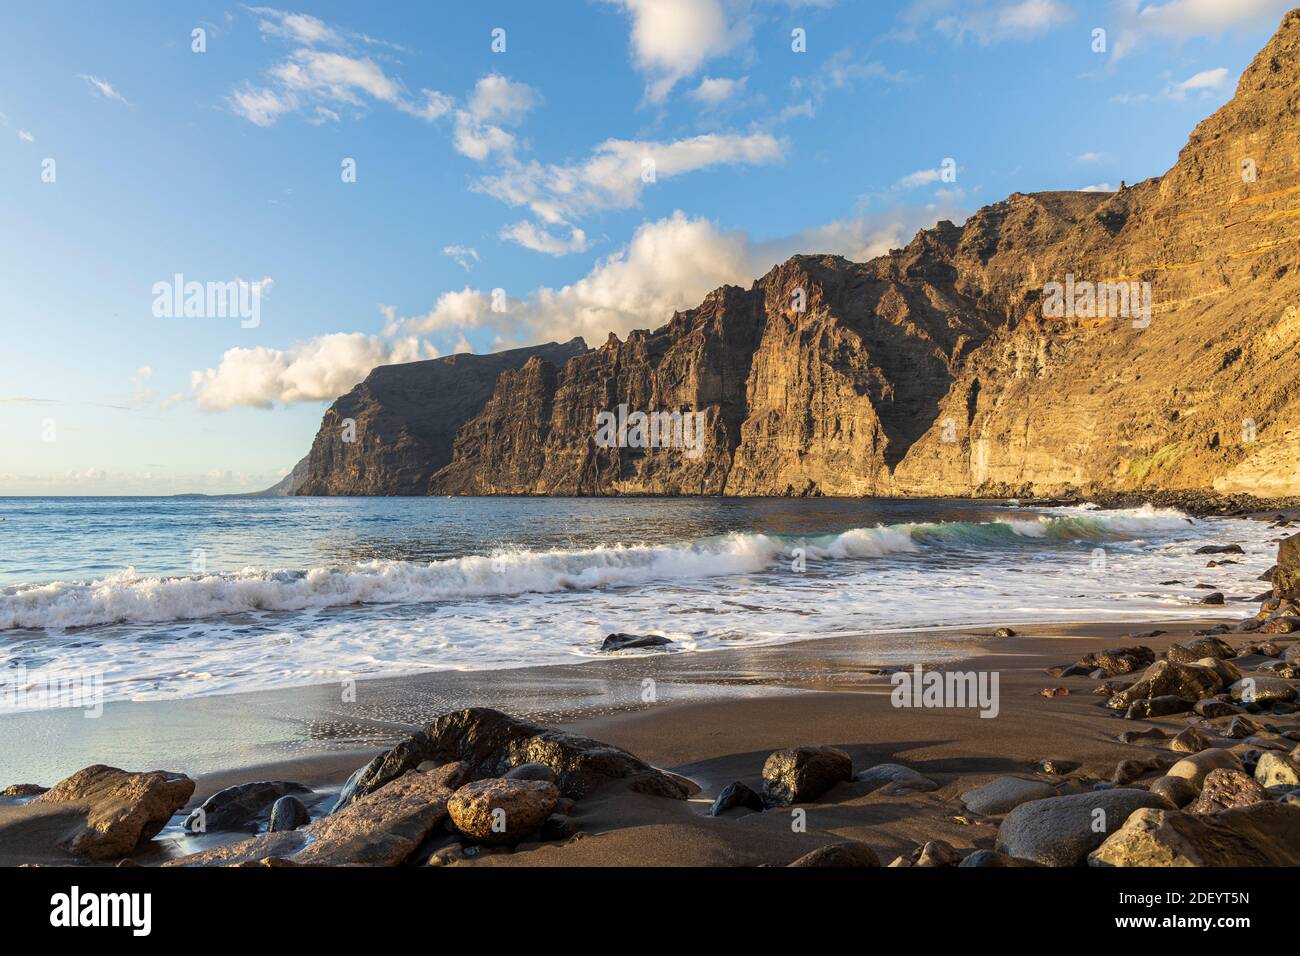 Los Gigantes cliffs on the west coast of Tenerife, from Playa Los Guios, Tenerife, Canary Islands, Spain Stock Photo